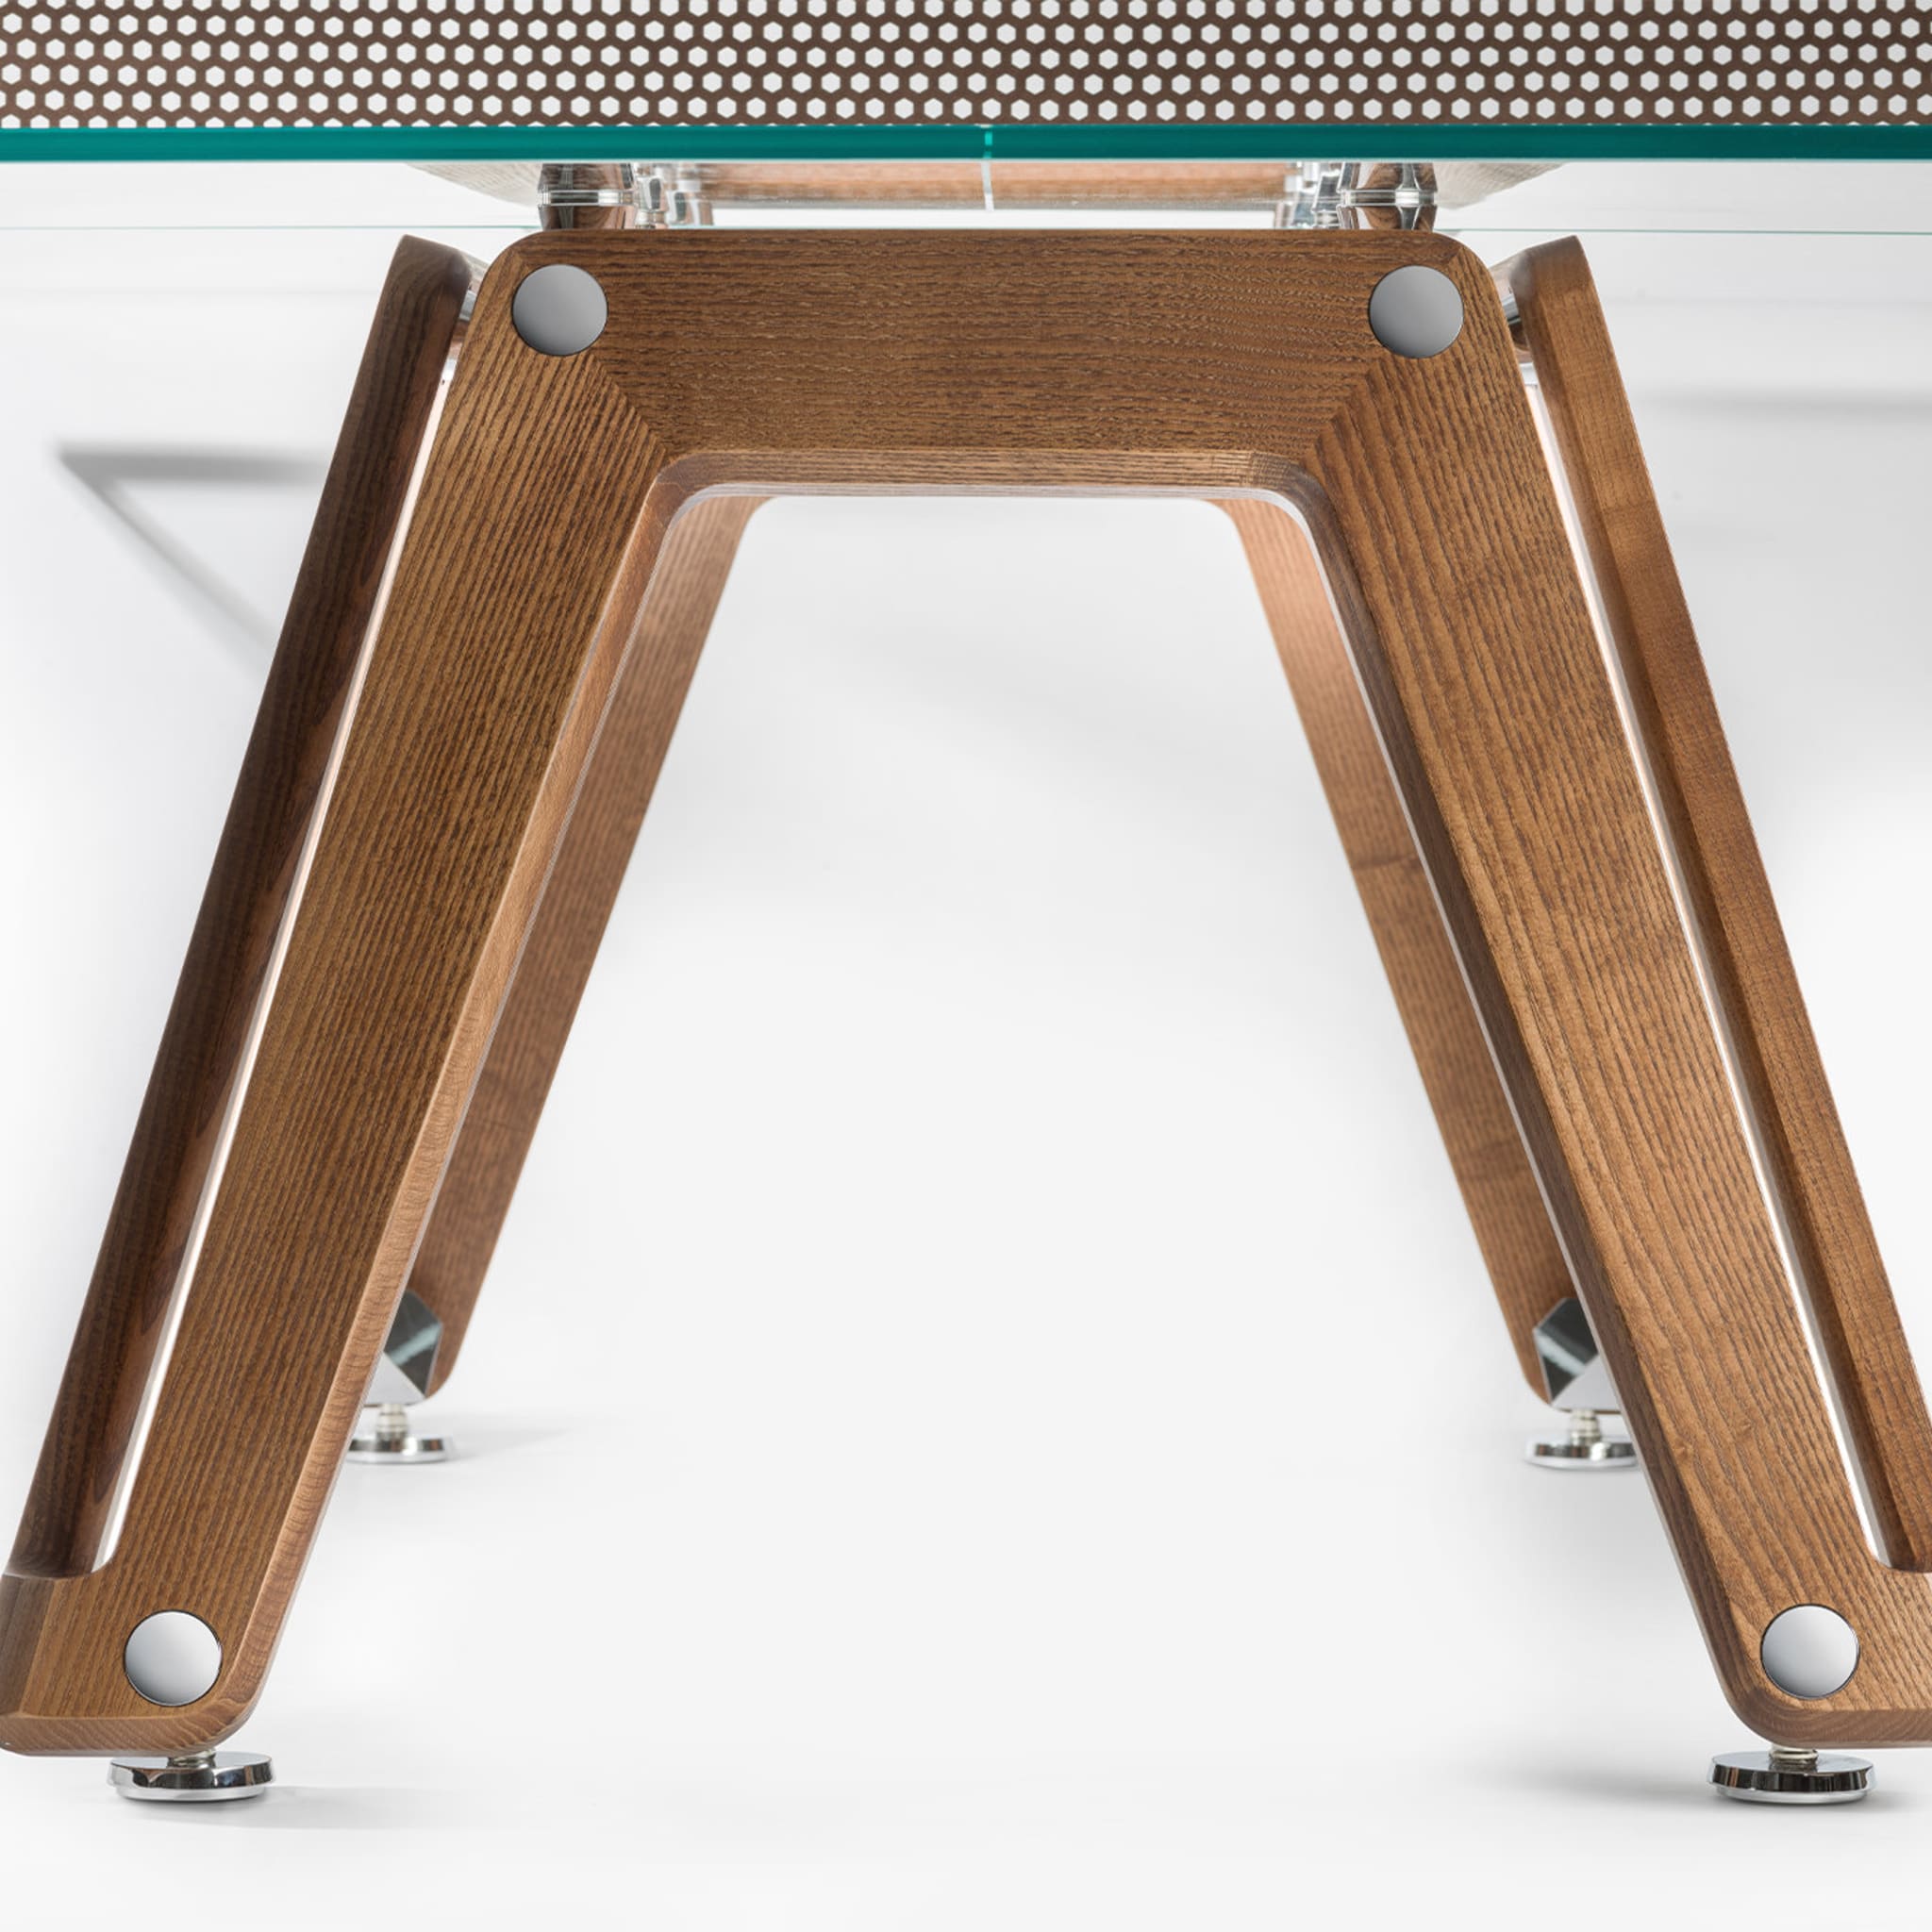 Lungolinea Wood Edition Ping-Pong Table - Alternative view 4